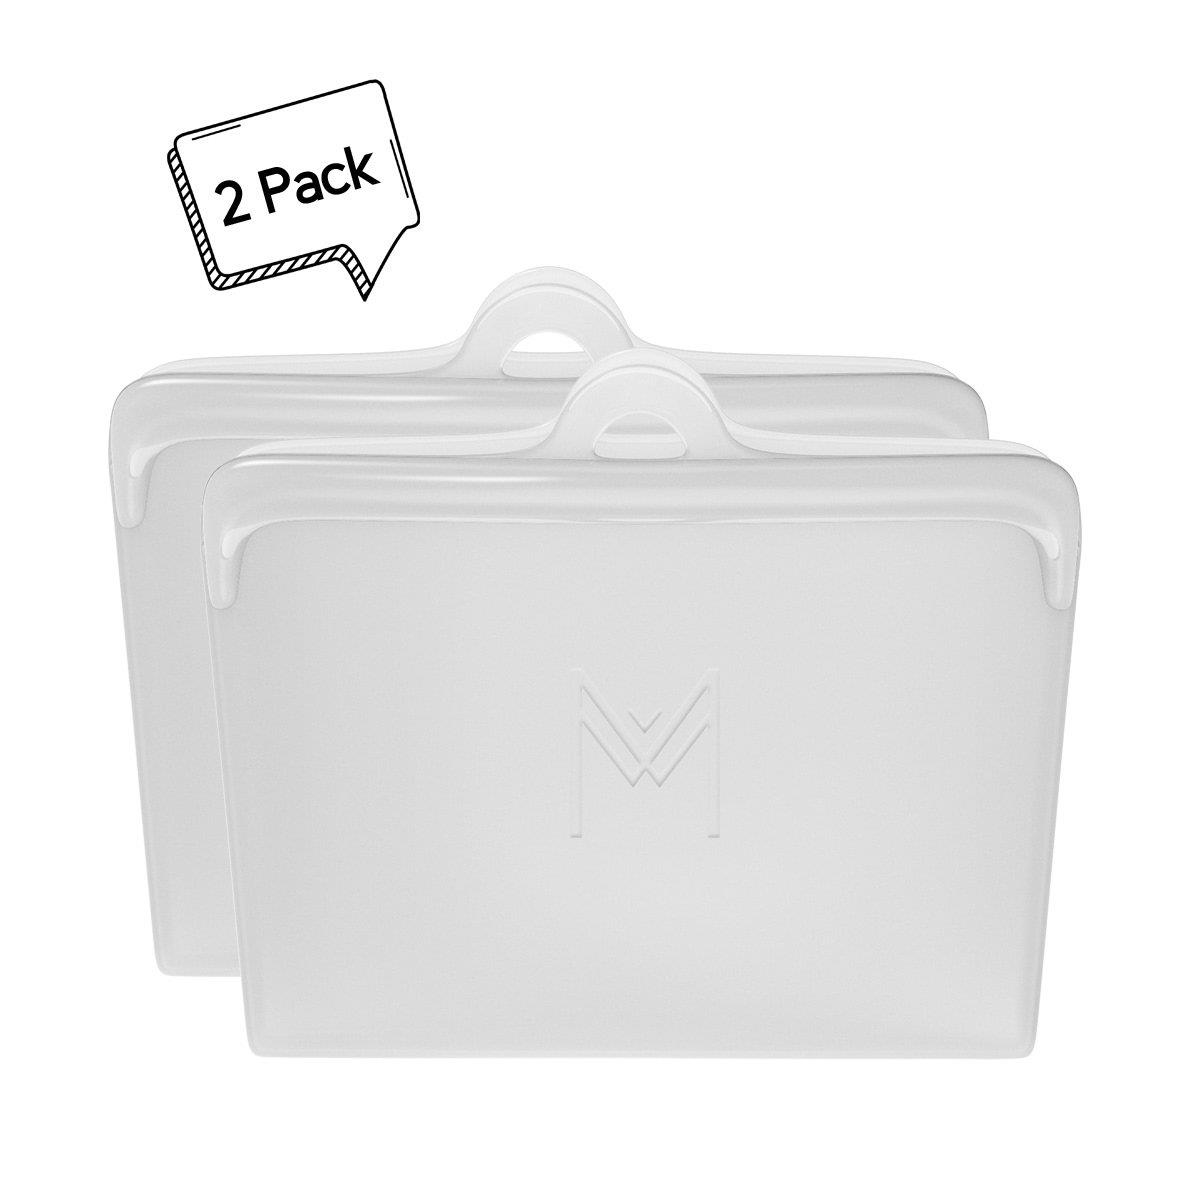 Montiico Reusable Silicone Food Pouch Clear